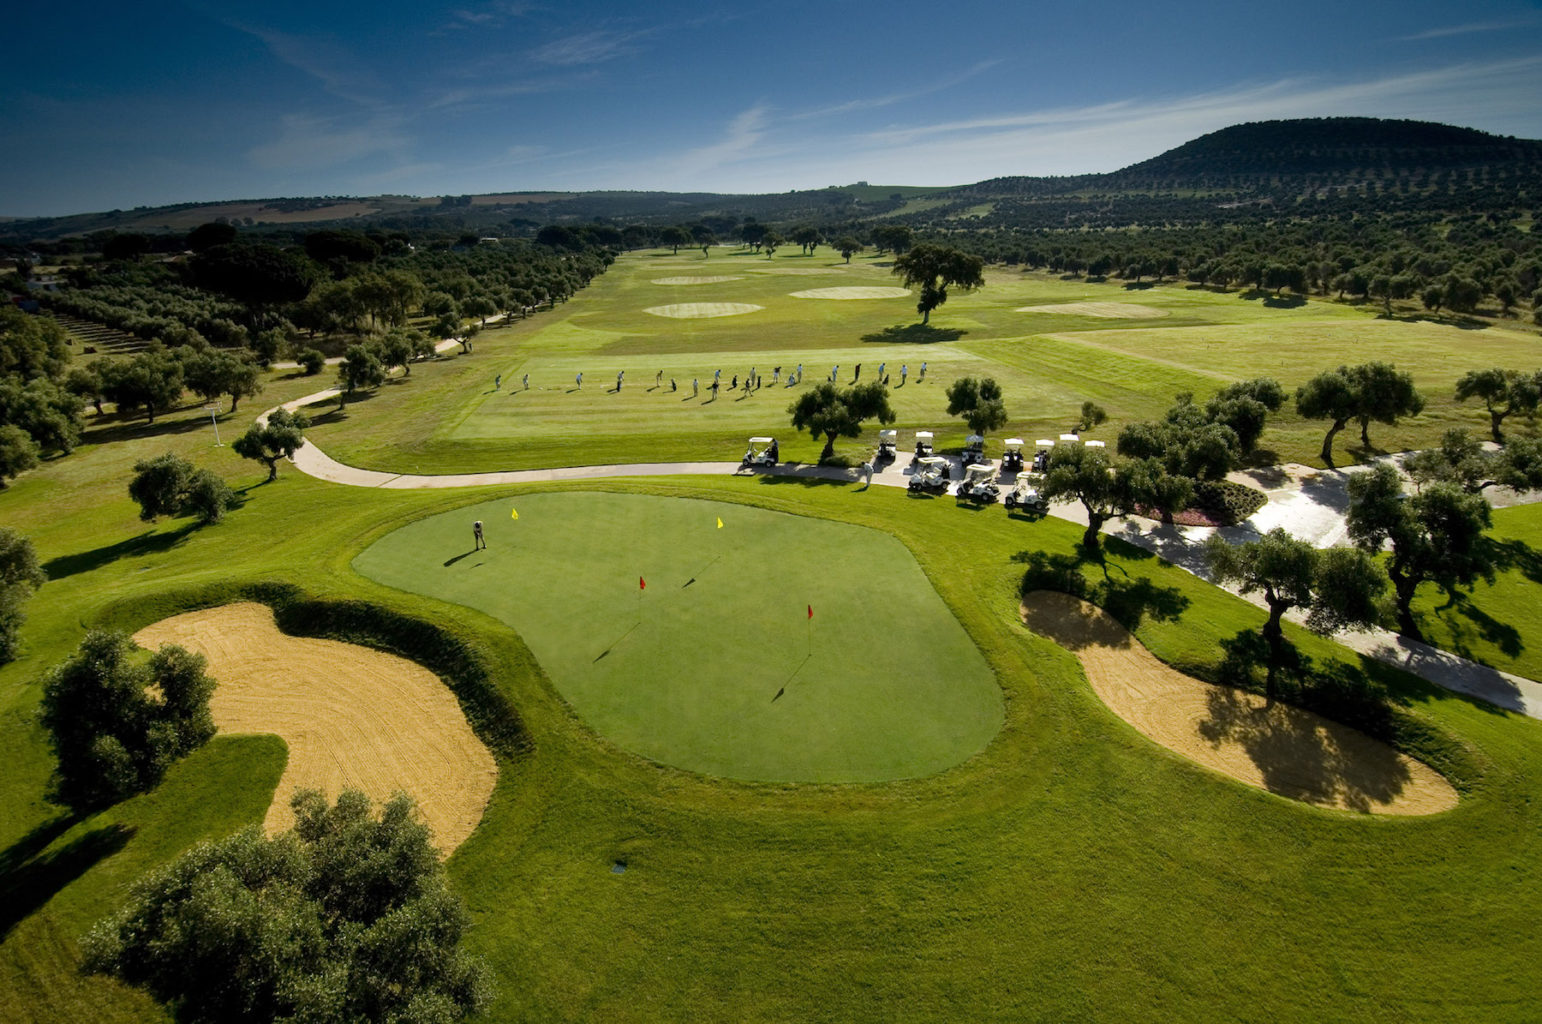 Arcos gardens golf, golf in Spain, golf andalusia